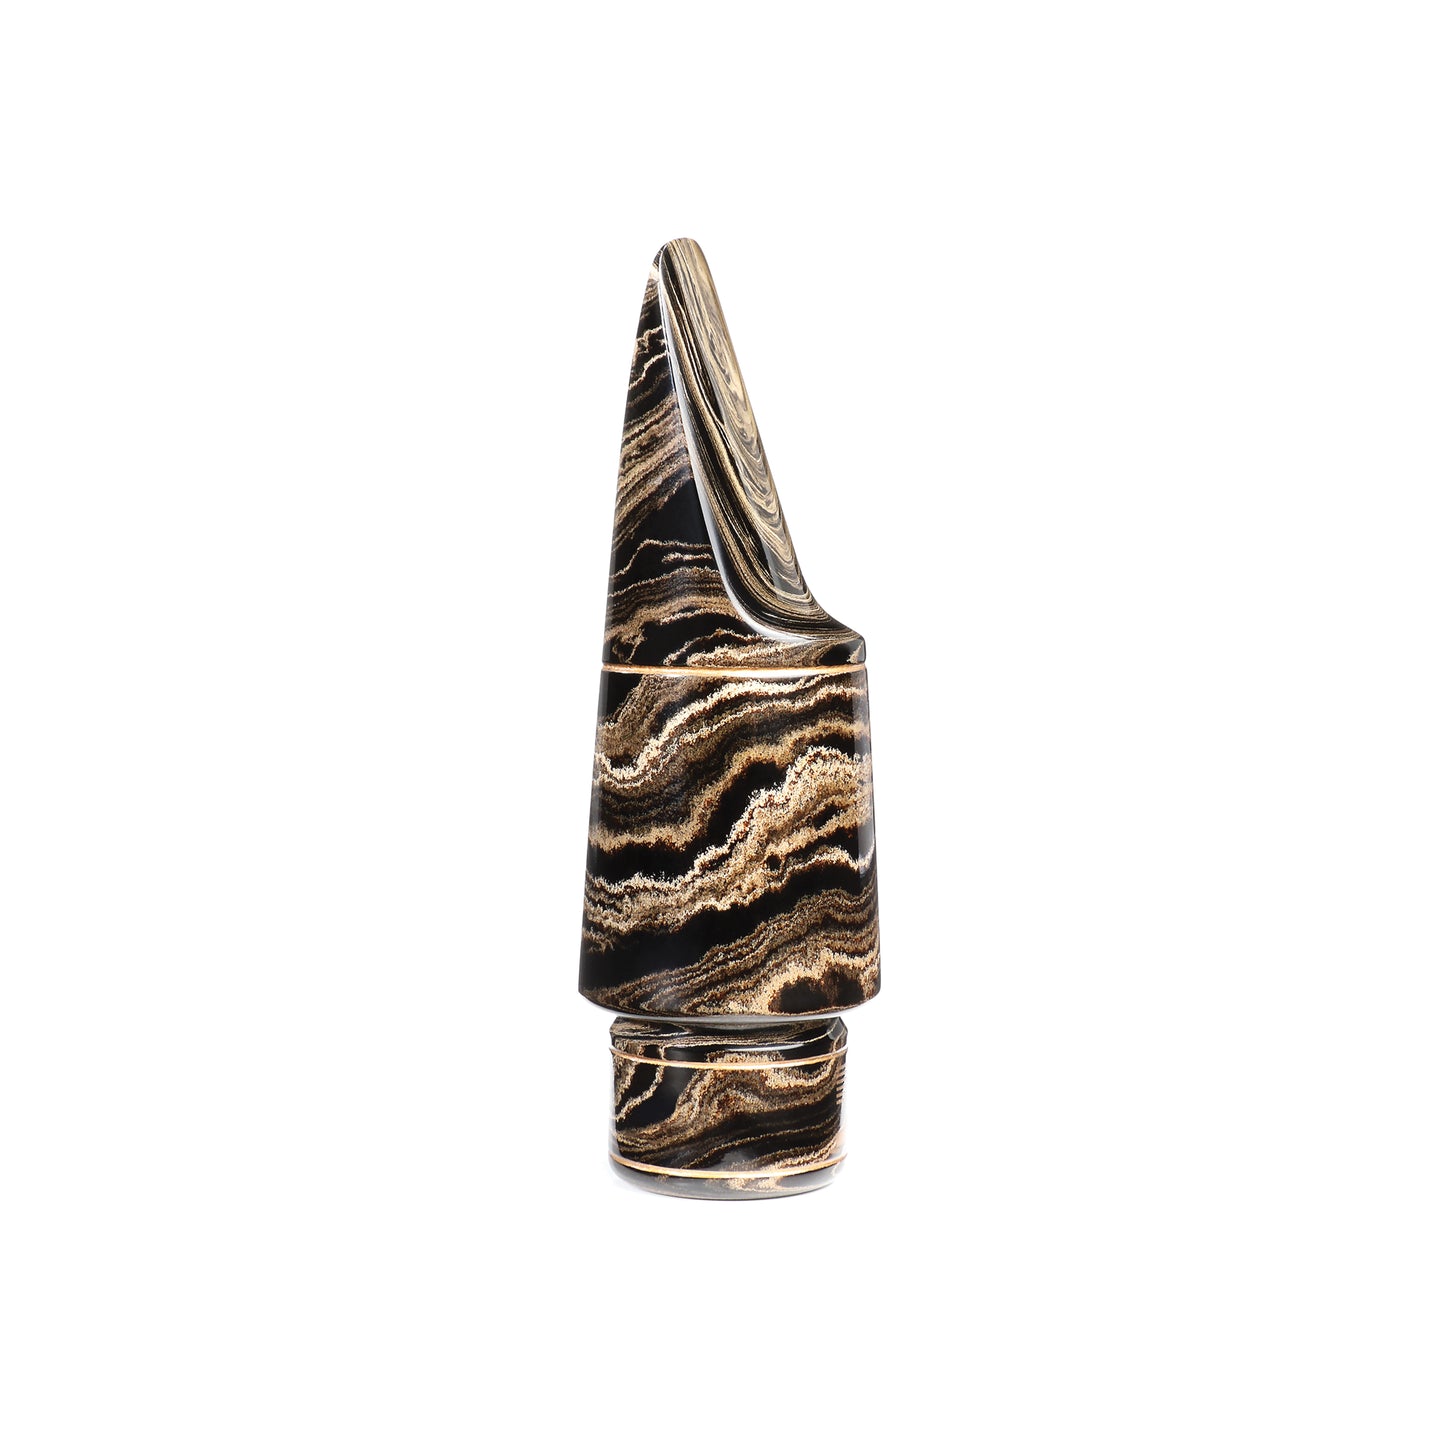 Select Jazz Tenor Mouthpiece - Marbled